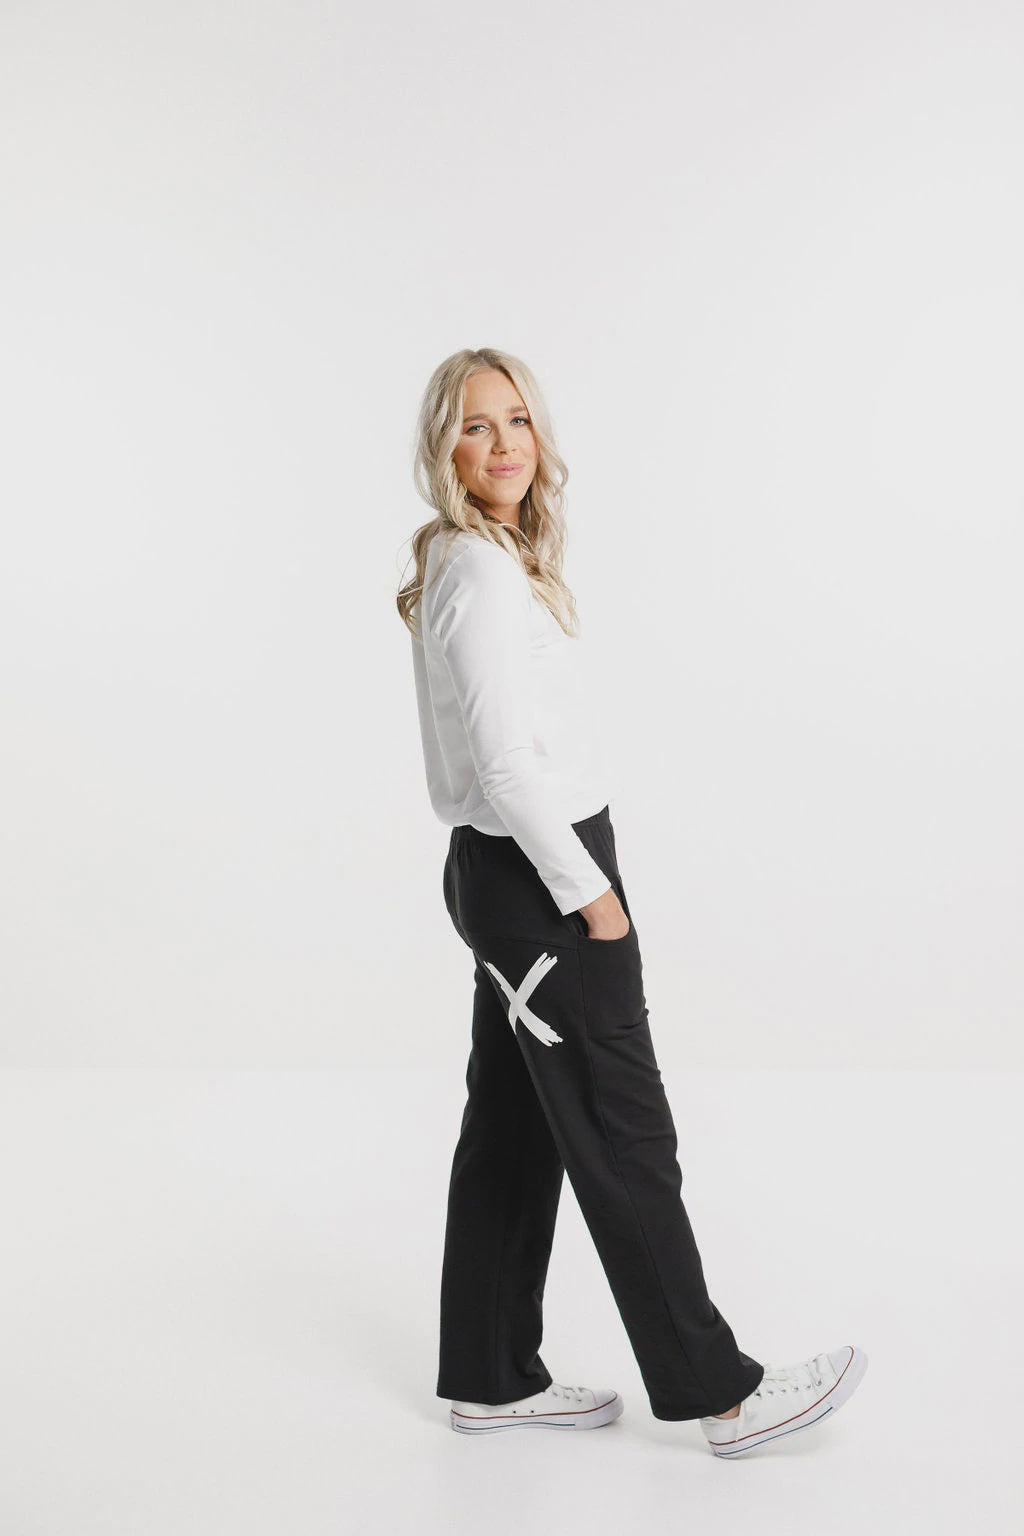 Home-Lee Avenue Pants Black with White X